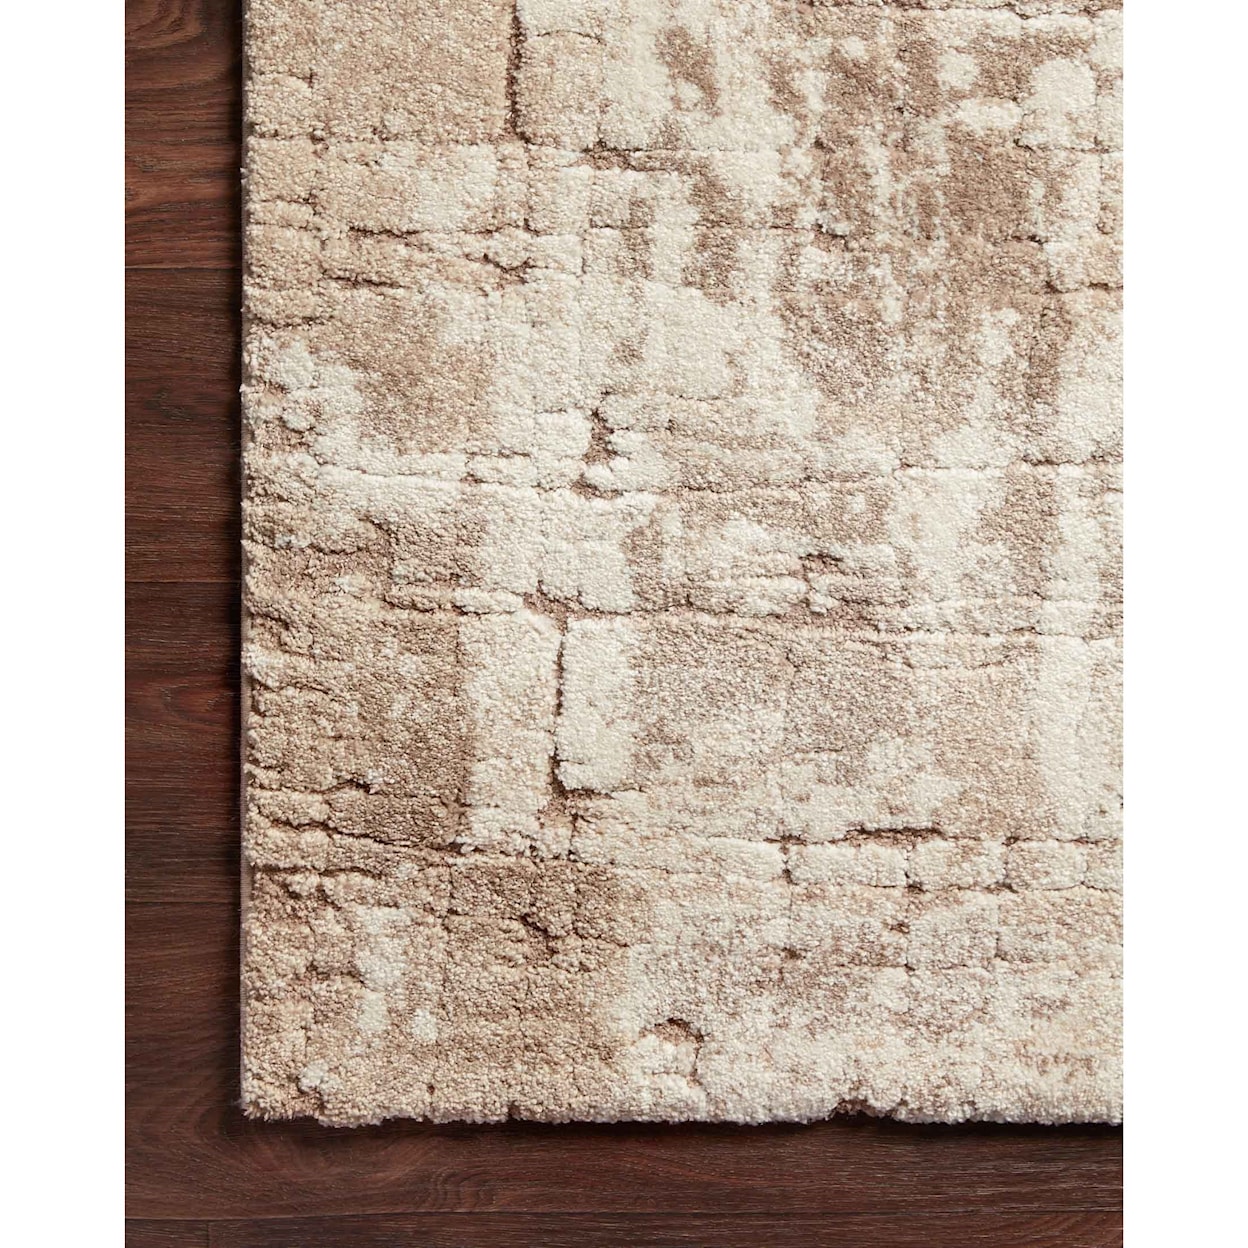 Reeds Rugs Theory 2'7" x 7'8" Beige / Taupe Rug